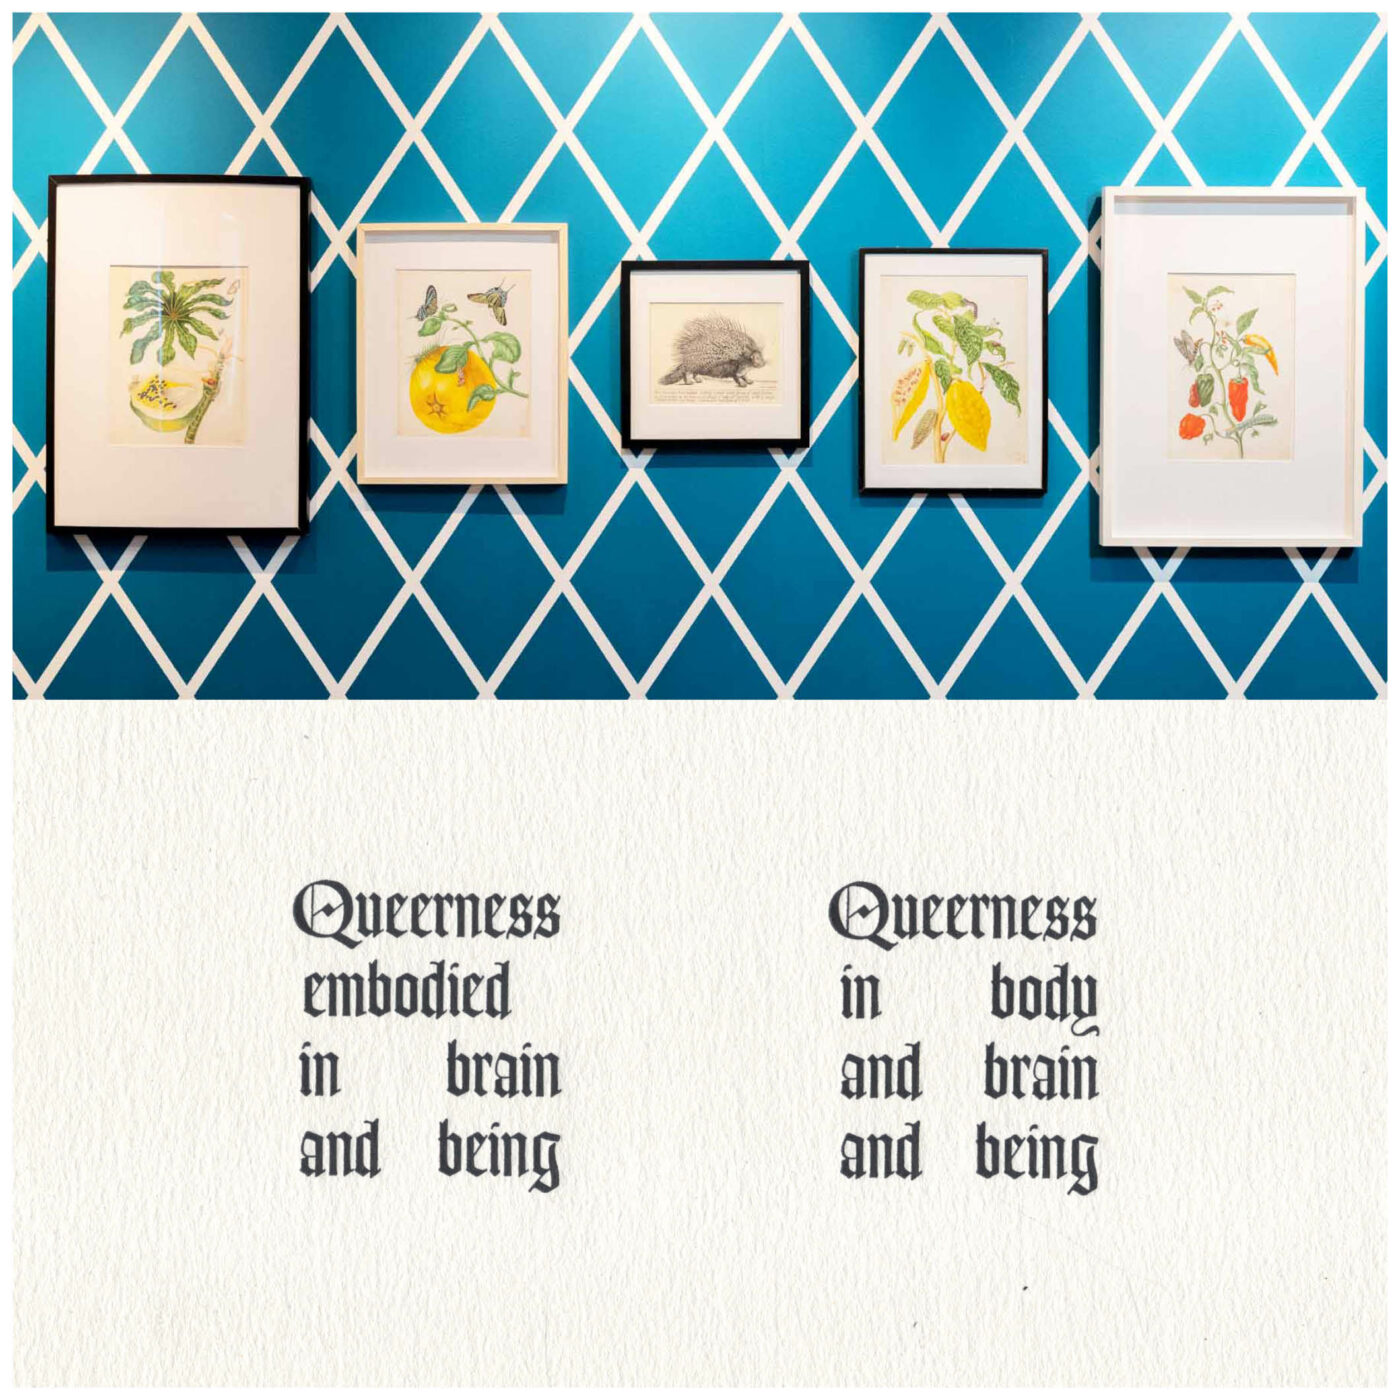 a split screen image where the top image is a work by Ceilidh Munroe, and the bottom one is a work by Callum McKenzie. The top photo features a dark blue patterned wall with framed illustrations of fruit and animals hung on it. The bottom image is a letterpress print of text that reads 'Queerness embodied in brain and being, Queerness in body and brain and being.'